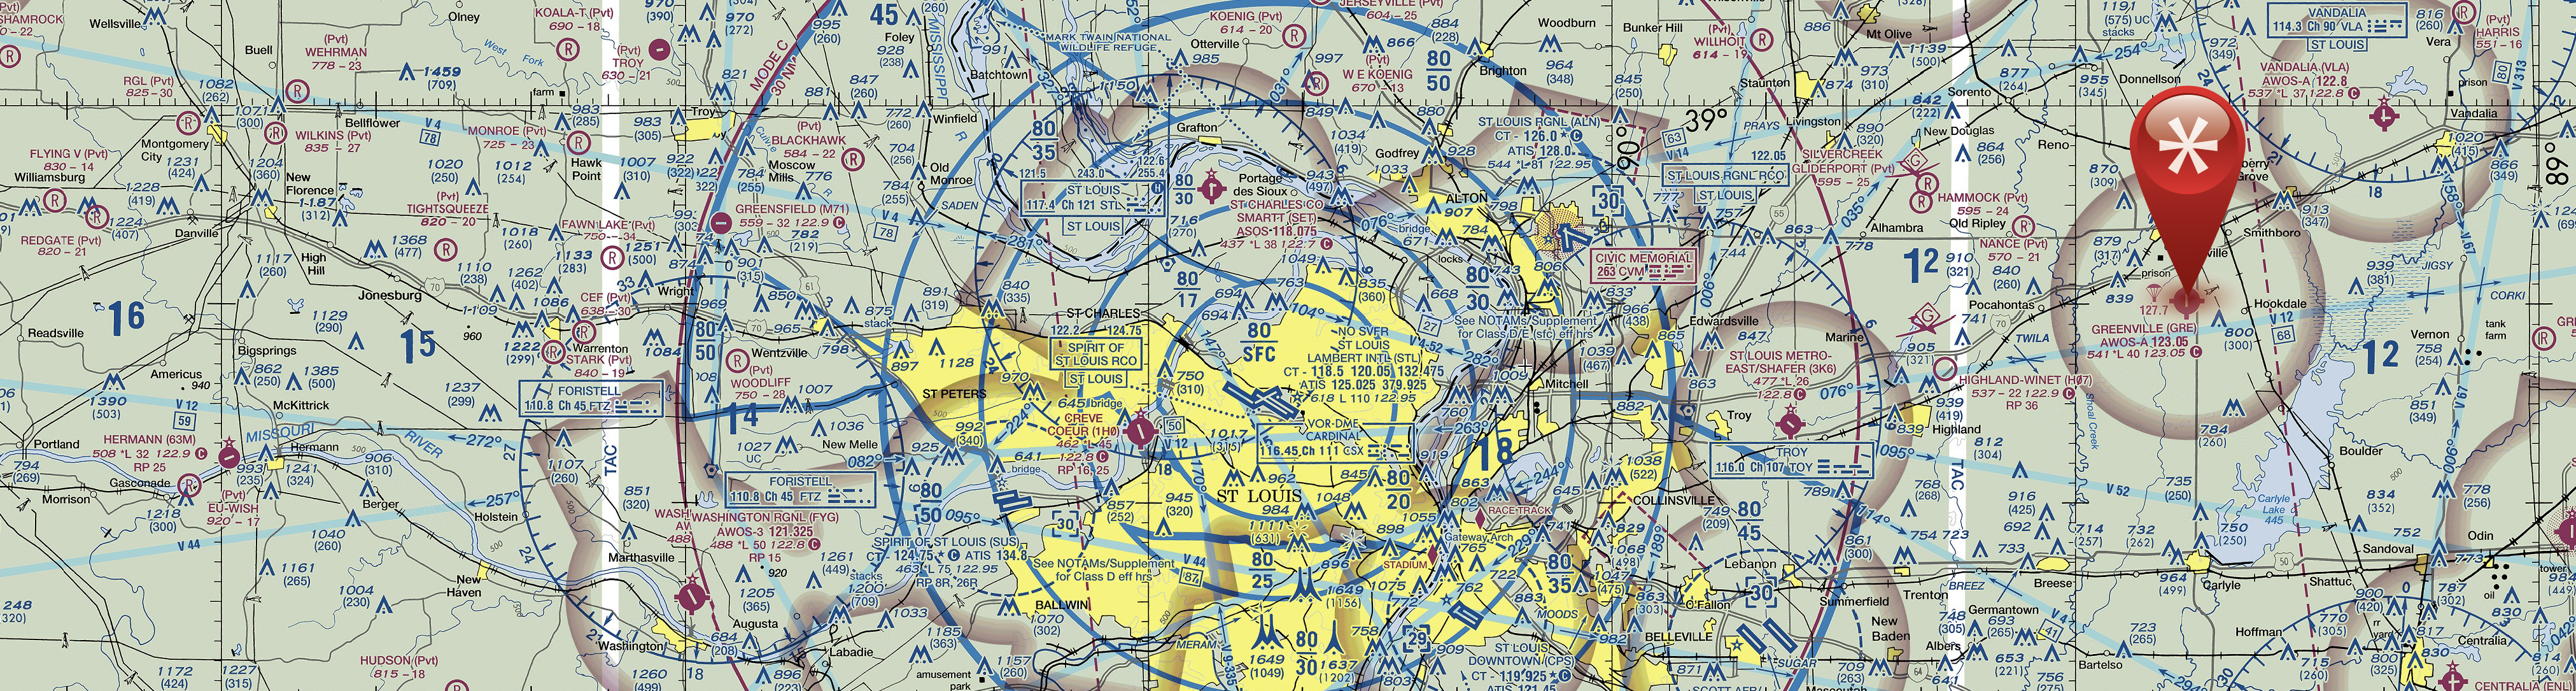 Greenville Airport on the Sectional Map